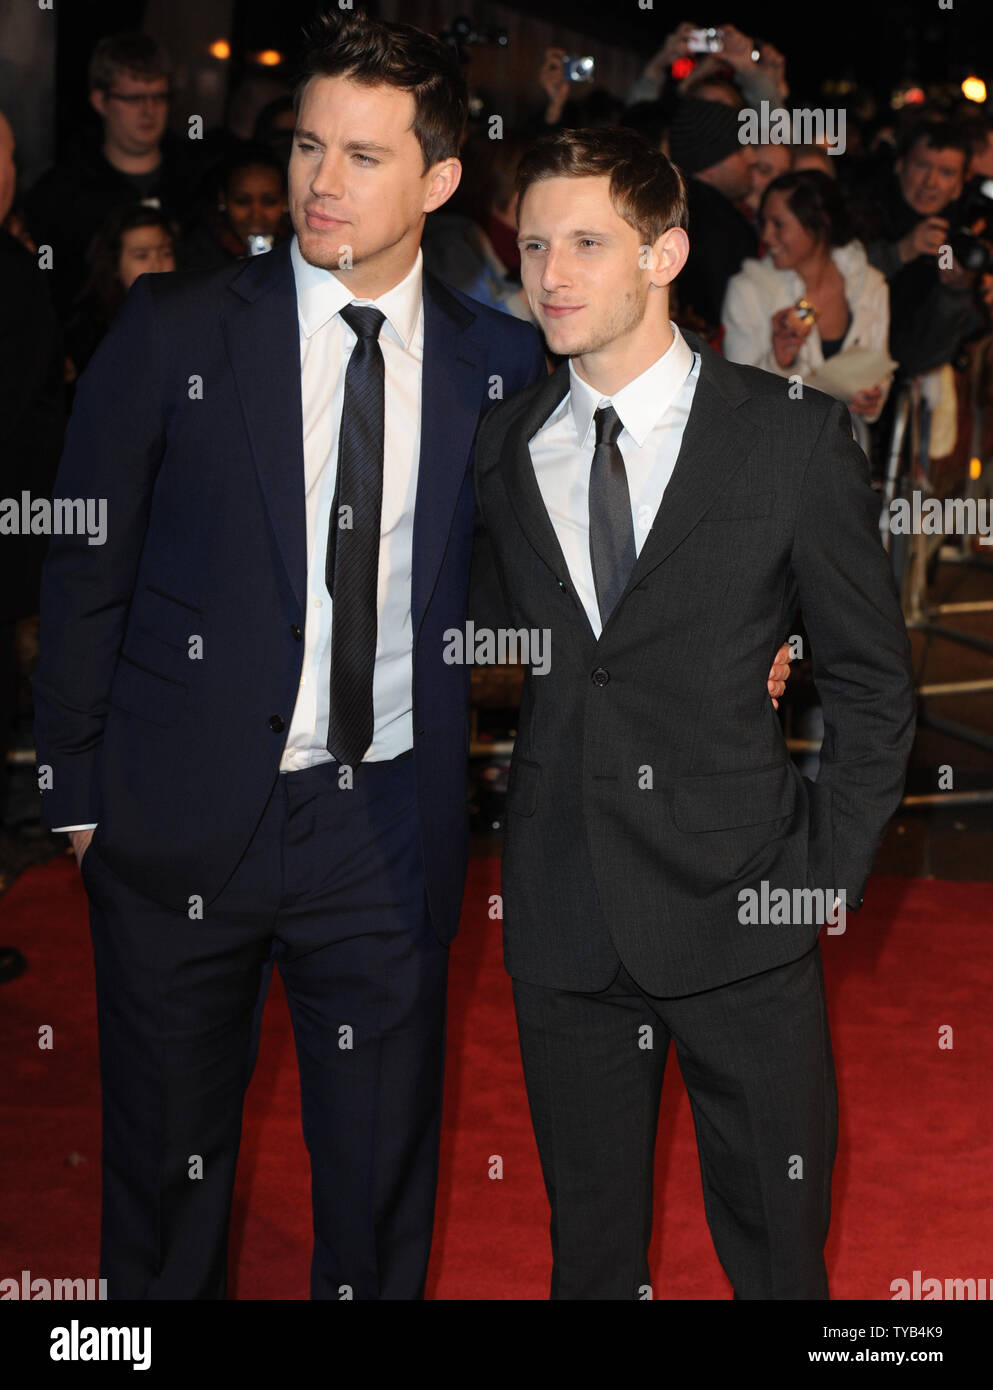 American actor Channing Tatum and British actor Jamie Bell attend the premiere of 'The Eagle' at Empire, Leicester Square in London on March 9, 2011.     UPI/Rune Hellestad Stock Photo